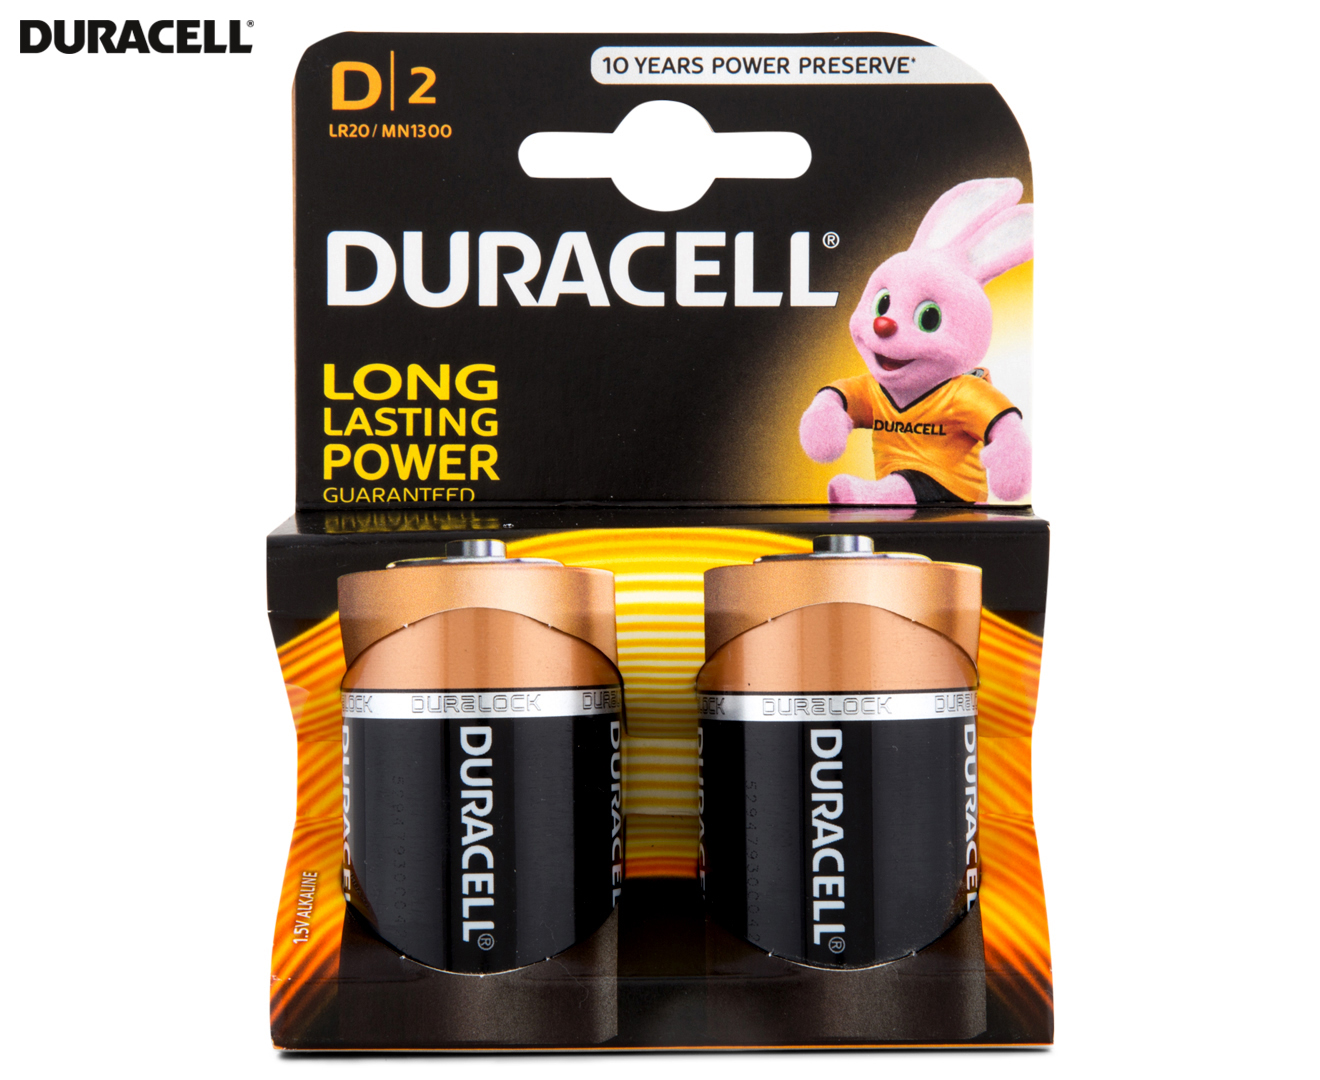 duracell batteries leaking